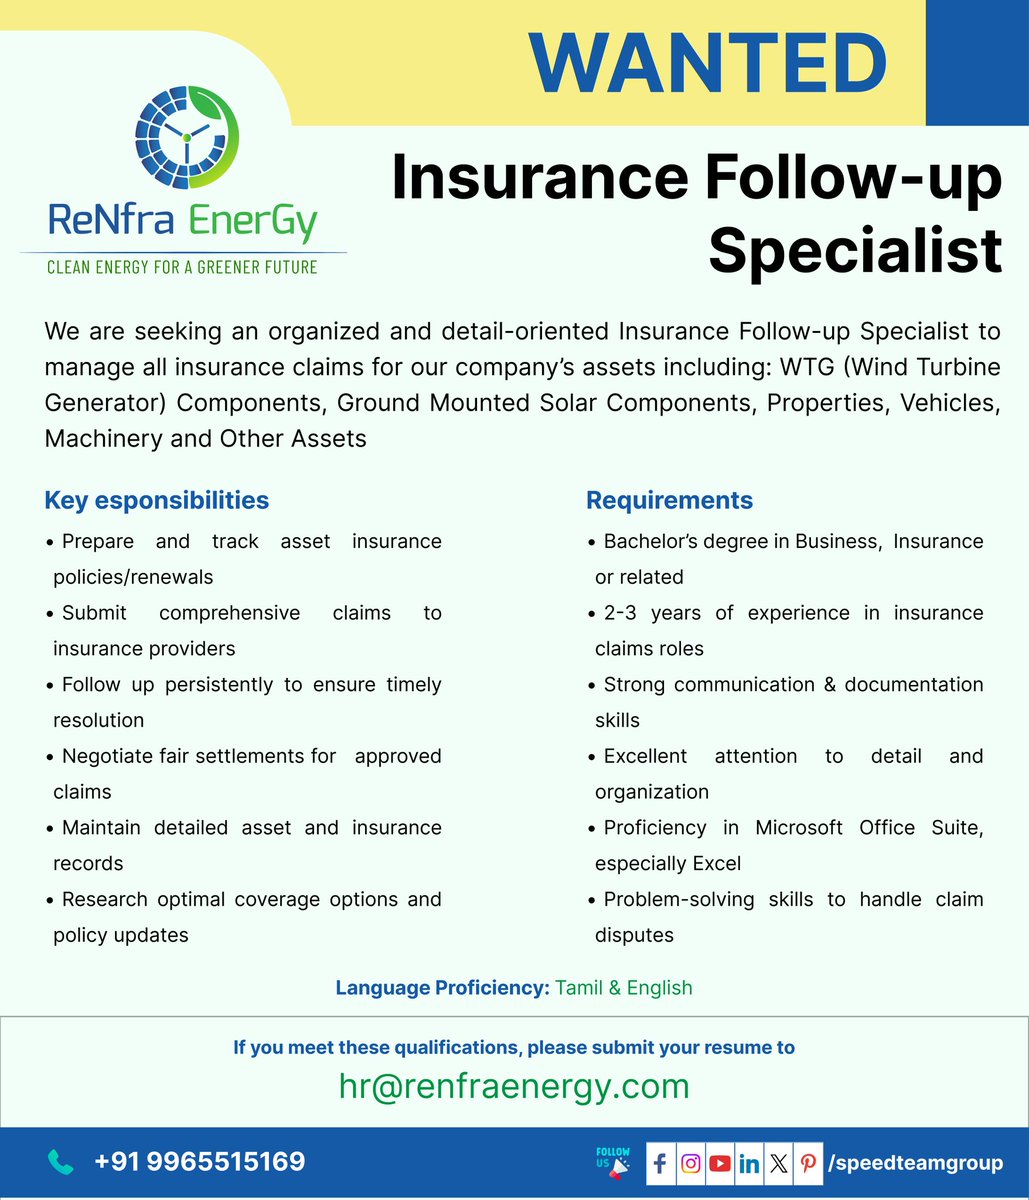 #JobOpening: Insurance Follow-up Specialist wanted to handle insurance claims for our wind, solar, and other company assets. Strong communication skills and attention to detail required. See image for full job description and apply now! #CareerOpportunity #InsuranceJobs